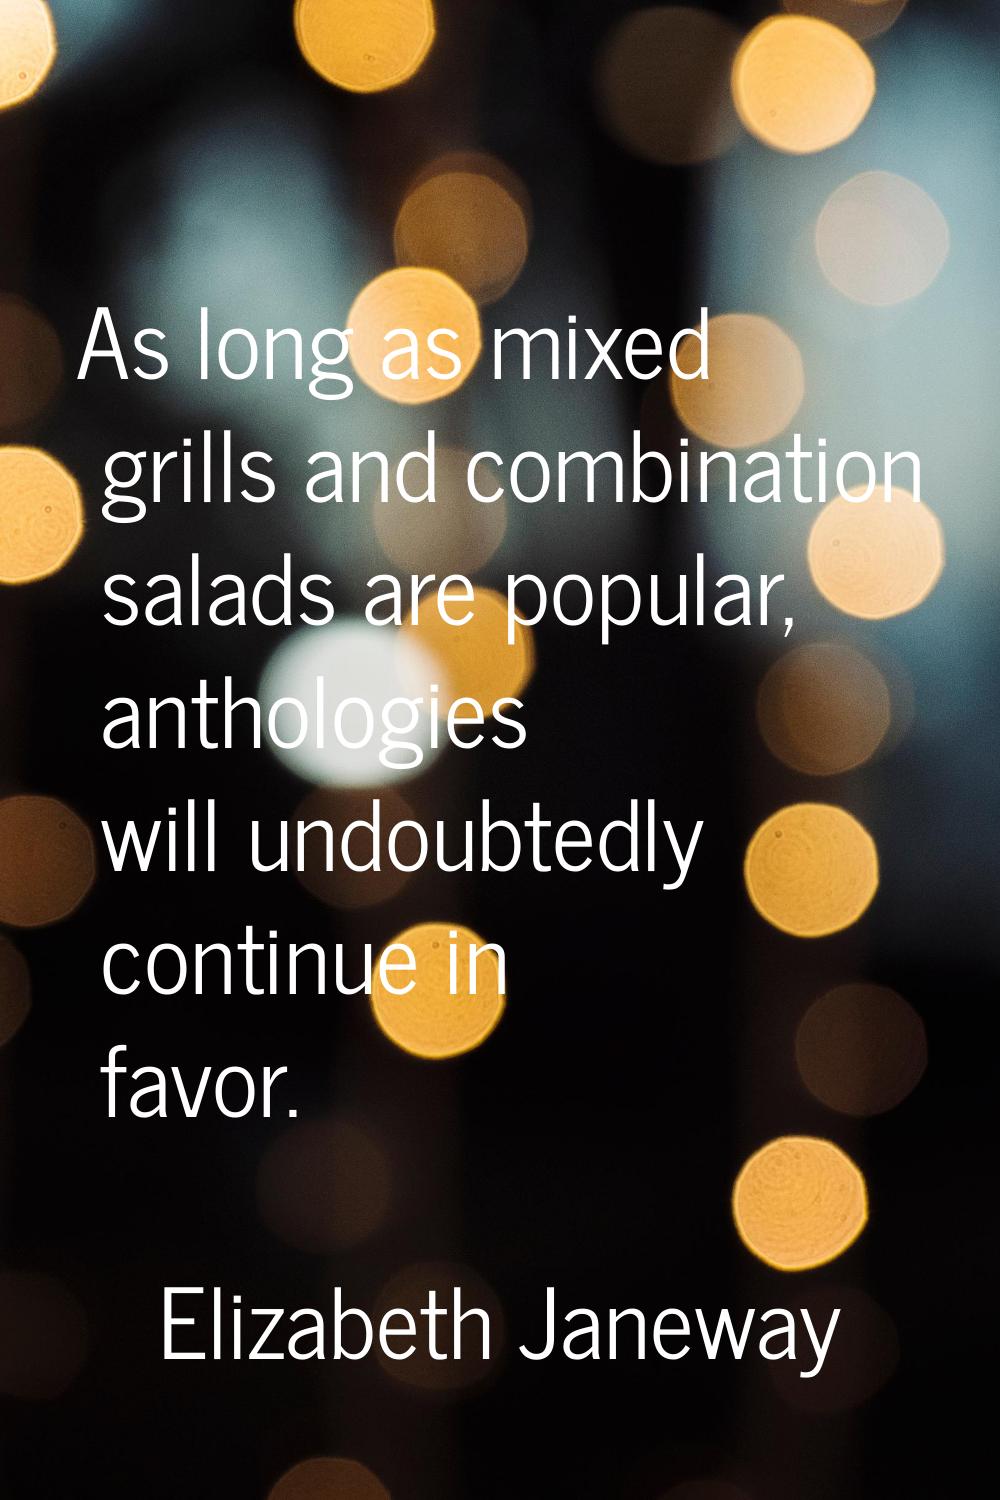 As long as mixed grills and combination salads are popular, anthologies will undoubtedly continue i